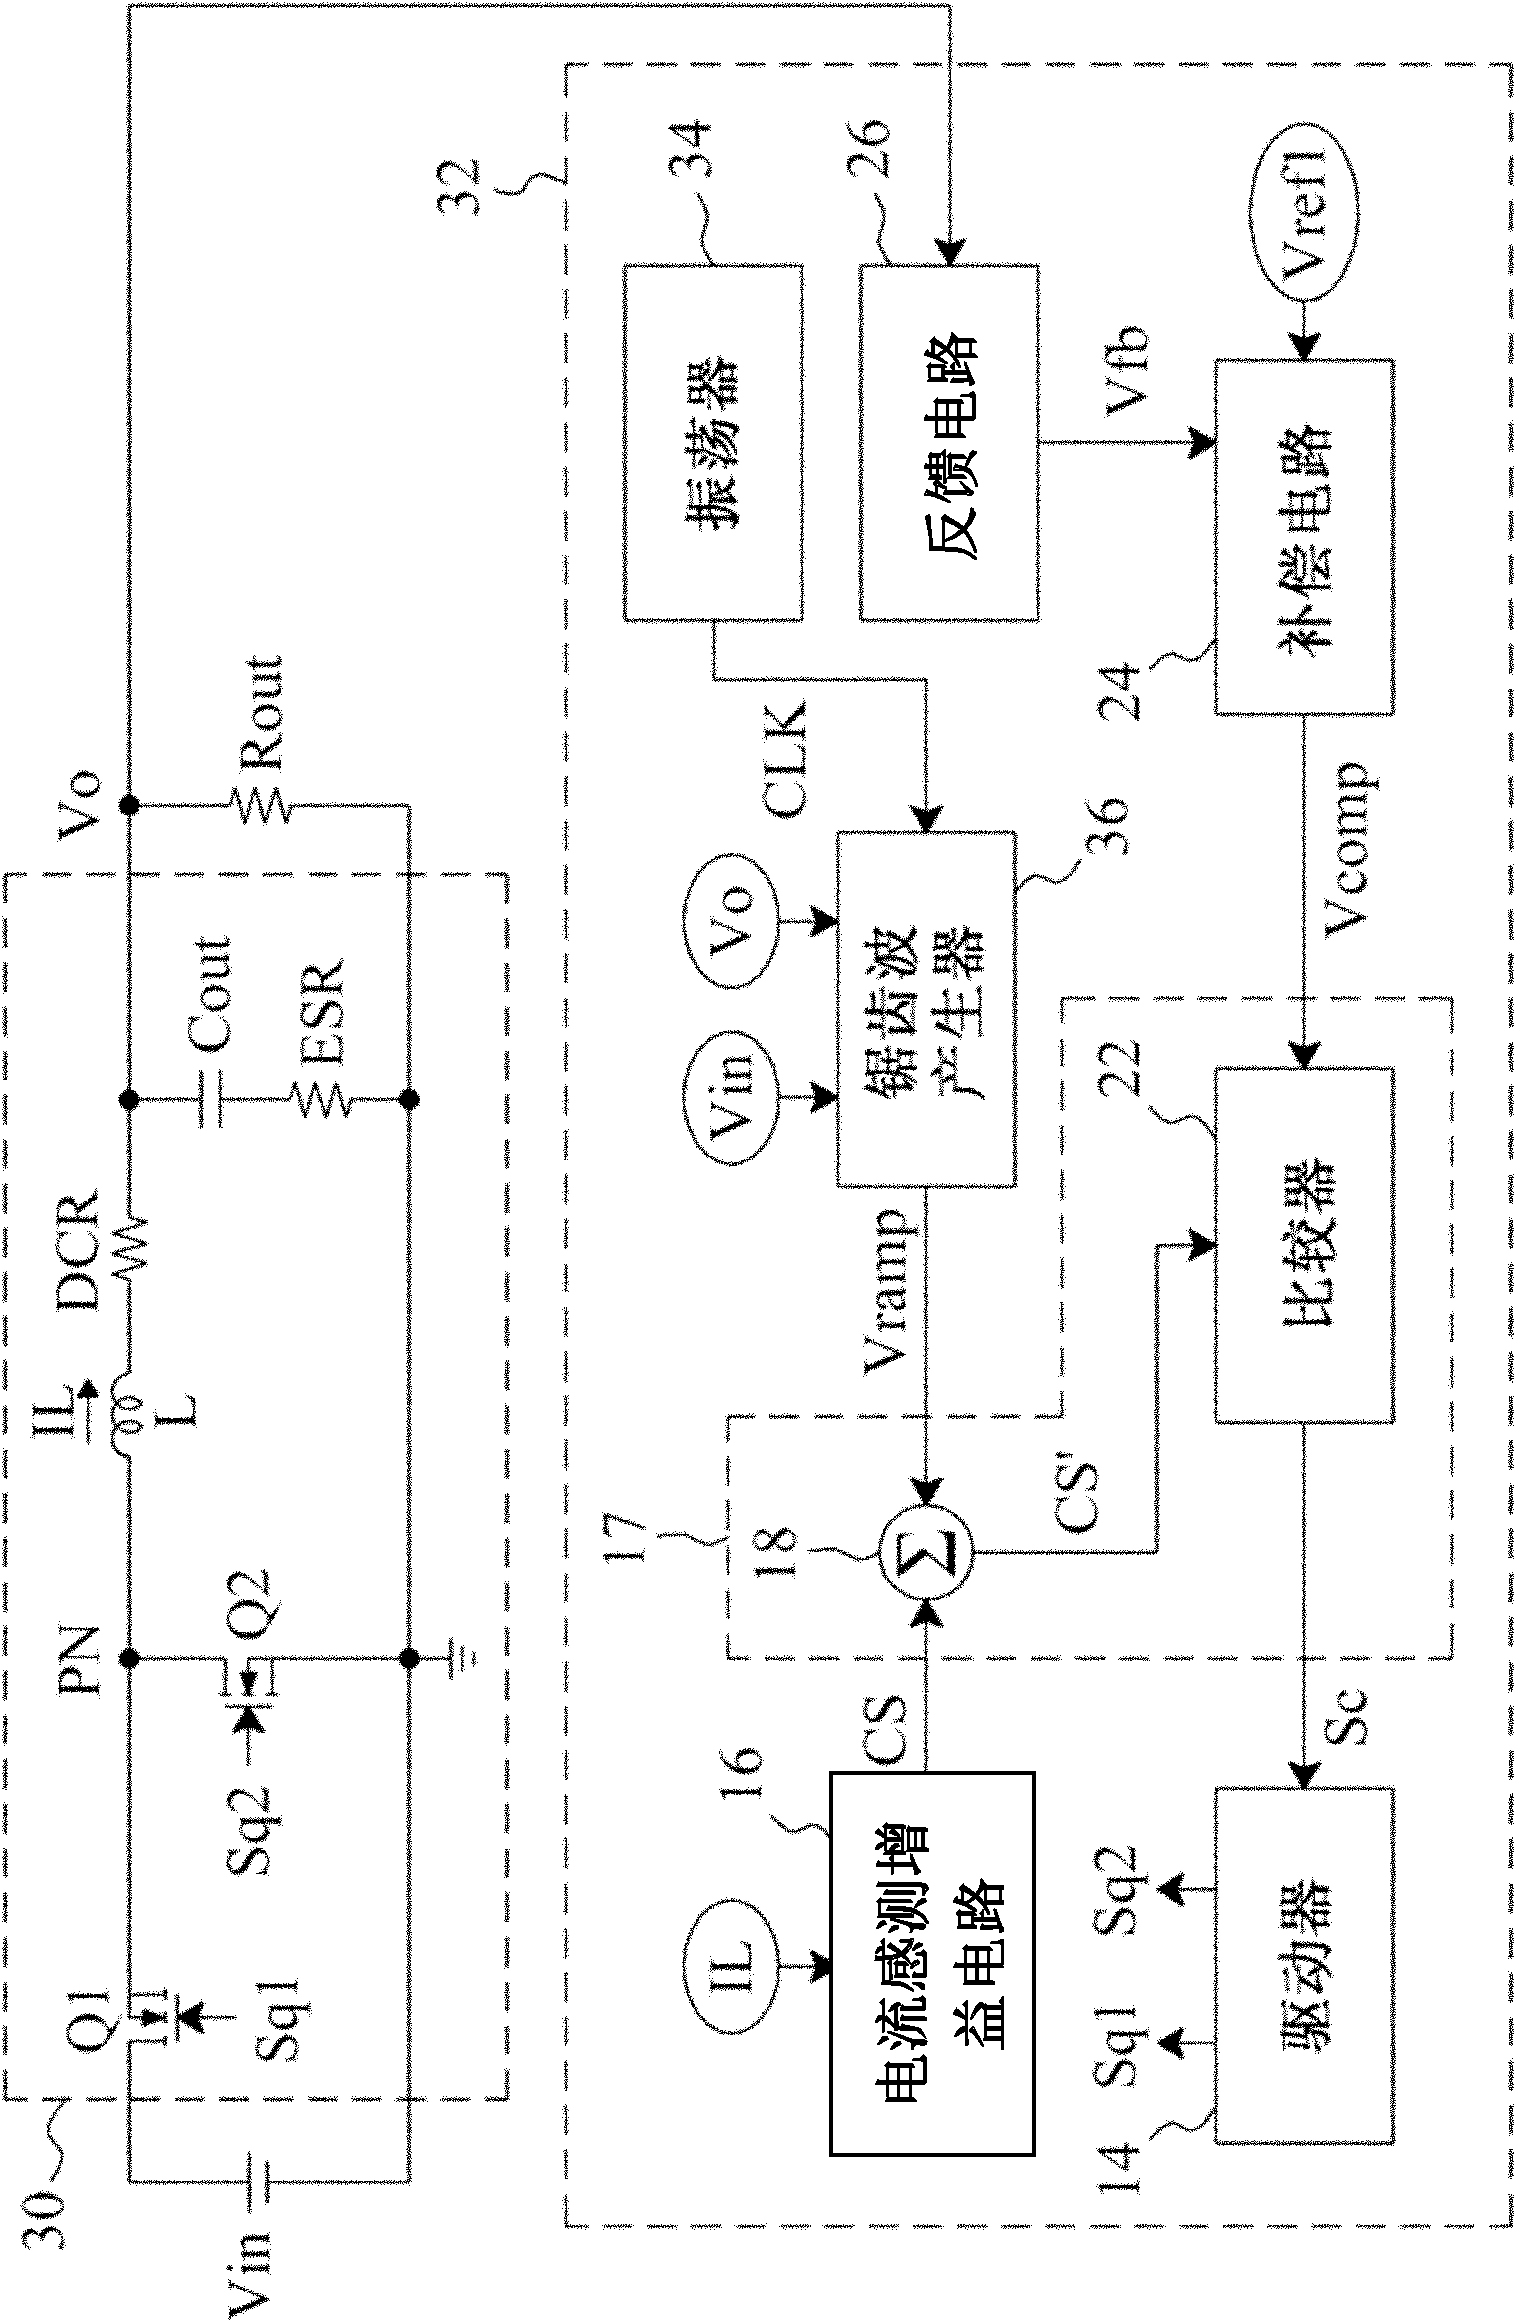 Circuit and method for controlling power converter in current mode